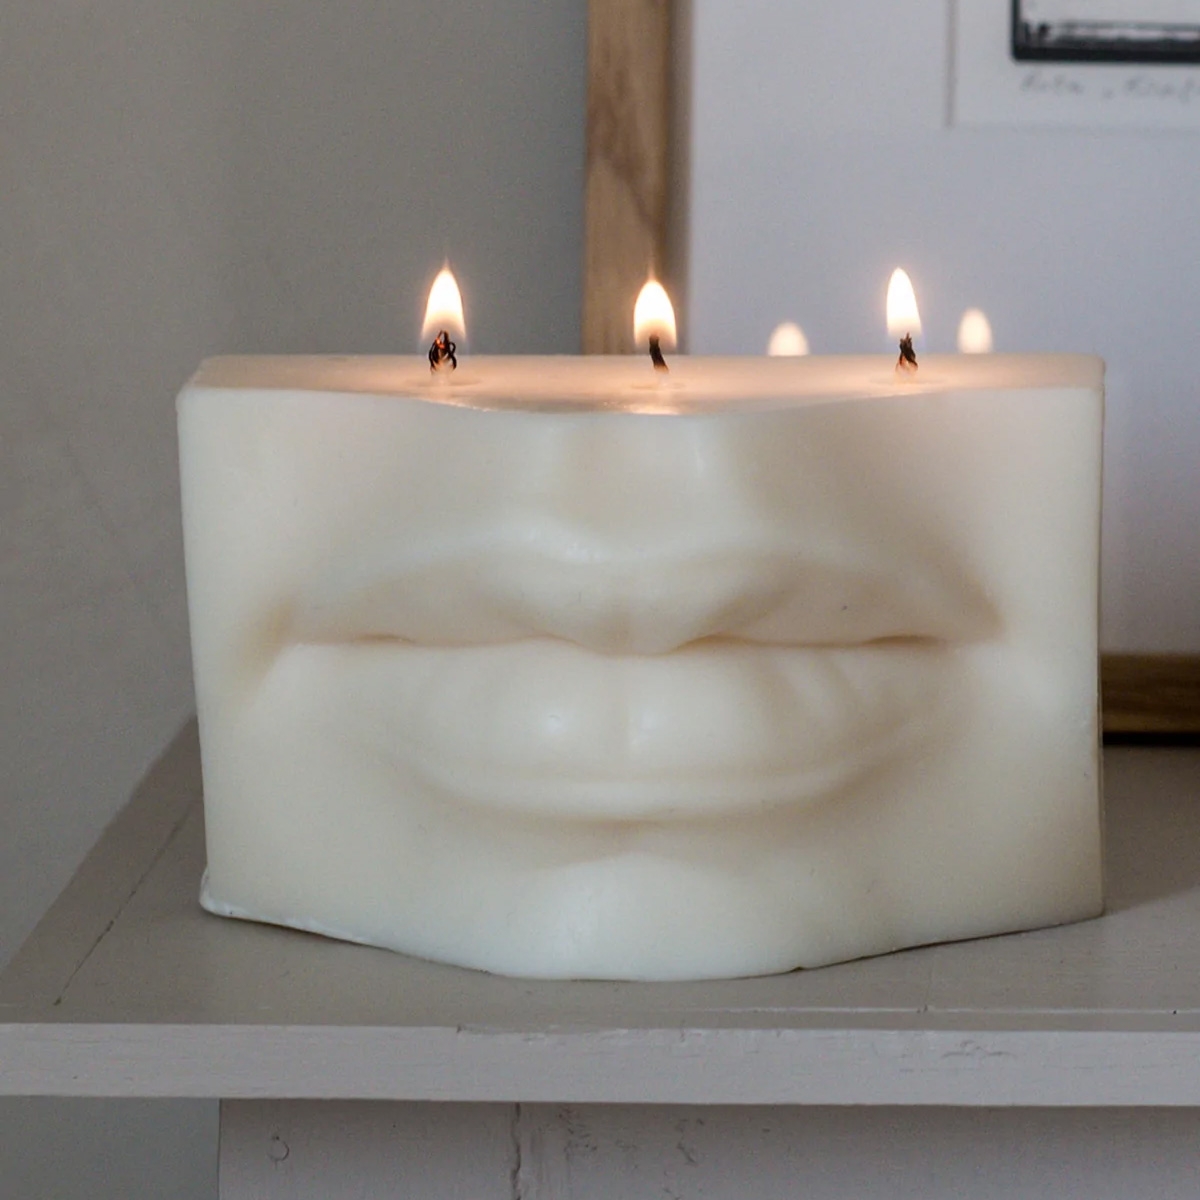 Image of Davids' Lips Soy Wax Vegan 3 Wick Candle in Ivory